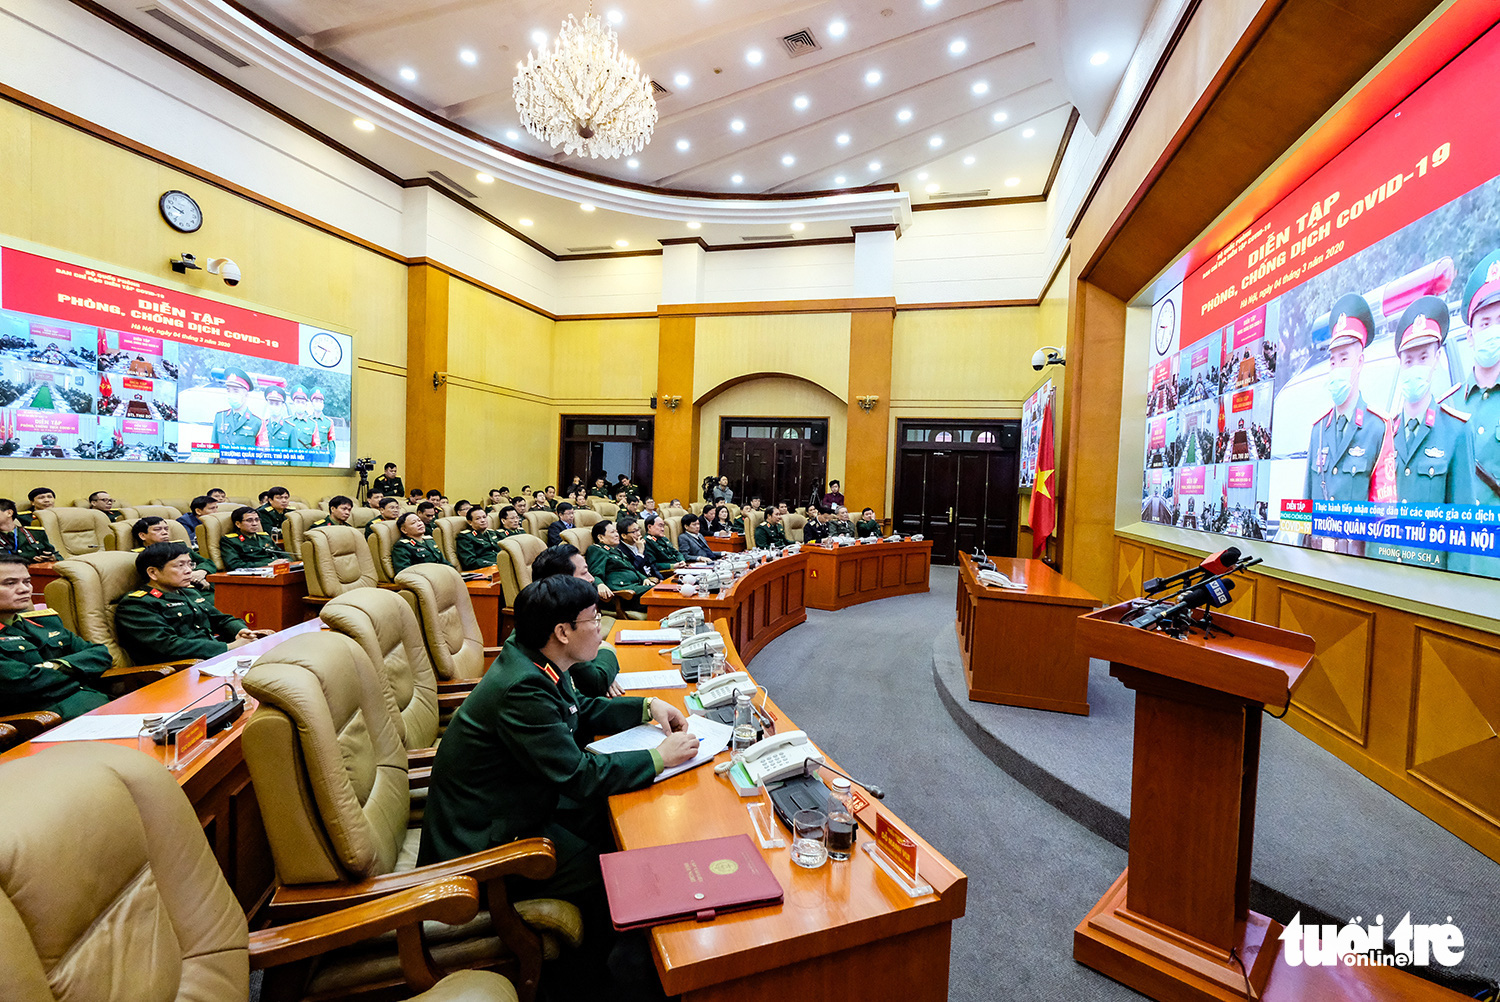 Delegates of the steering committee for COVID-19 prevention and Ministry of National Defense observe an exercise for COVID-19 prevention at the headquarters of the defense ministry in Hanoi, March 4, 2020. Photo: Nam Tran / Tuoi Tre